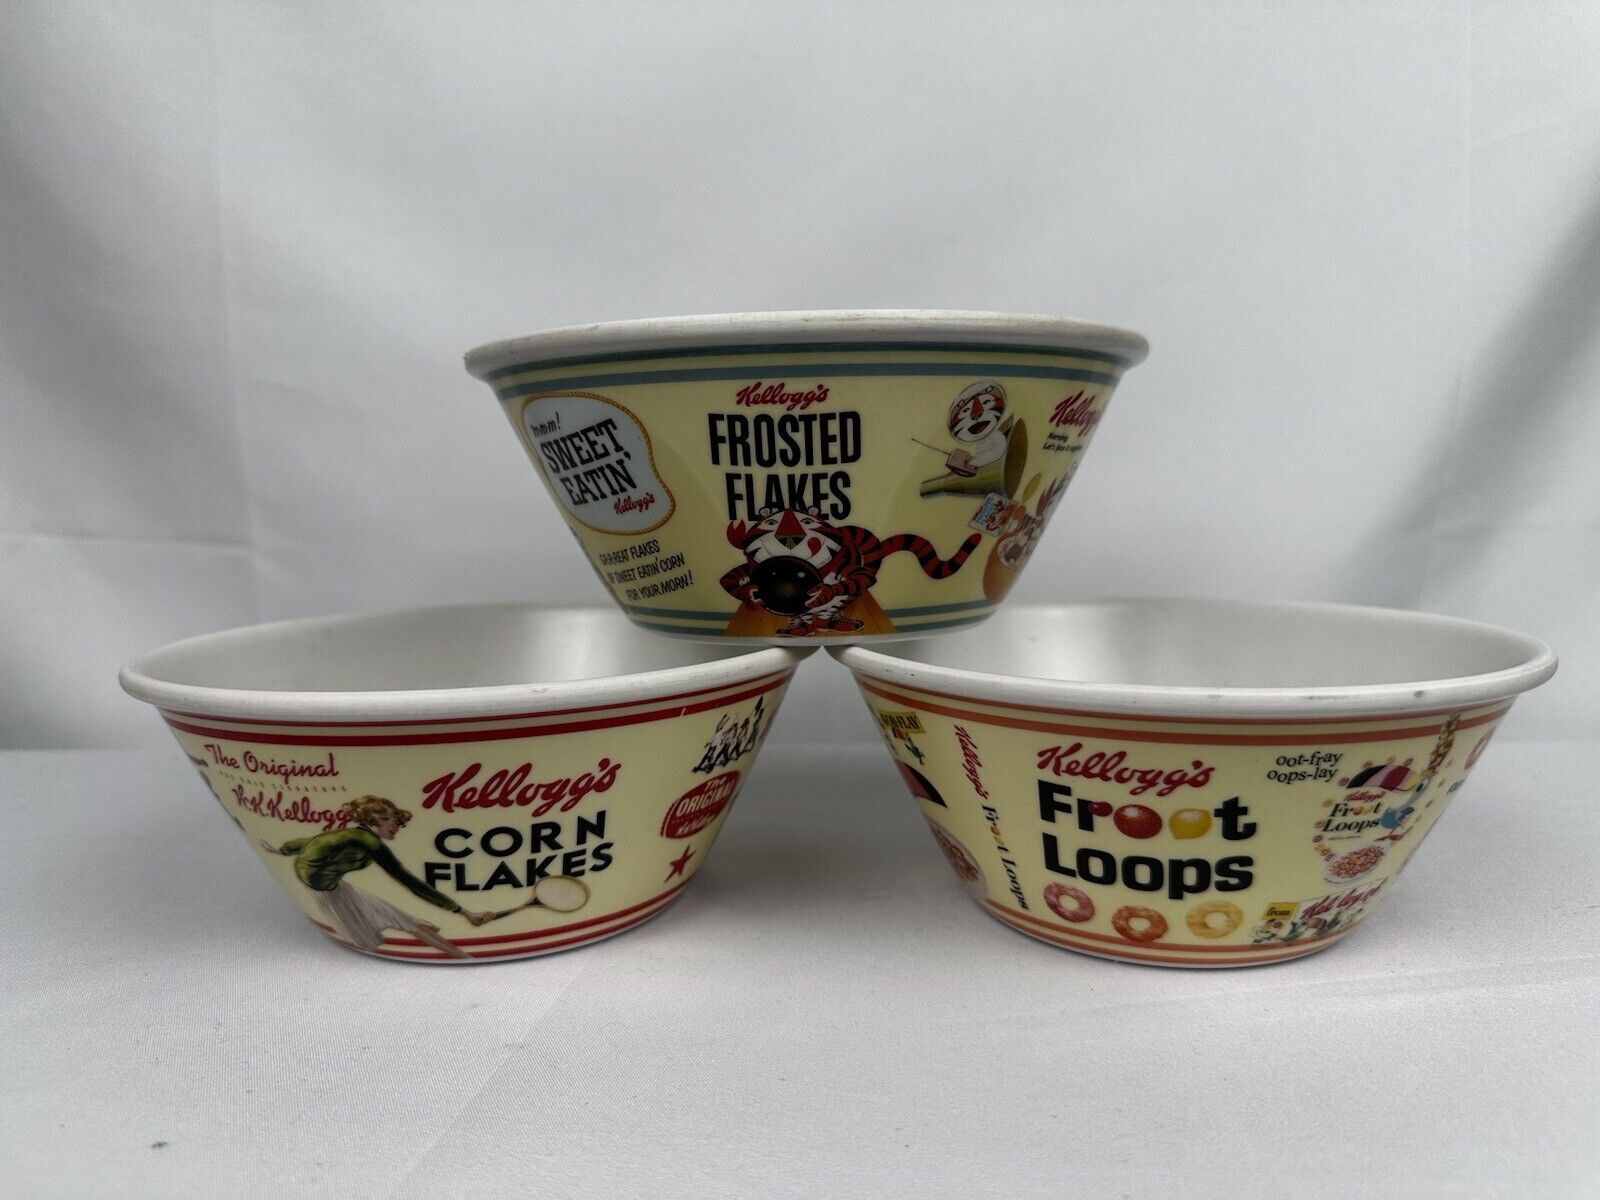 3 Kellogg’s 2011 Cereal Bowls Melamine Retro Corn Flakes Froot Loops Frosted